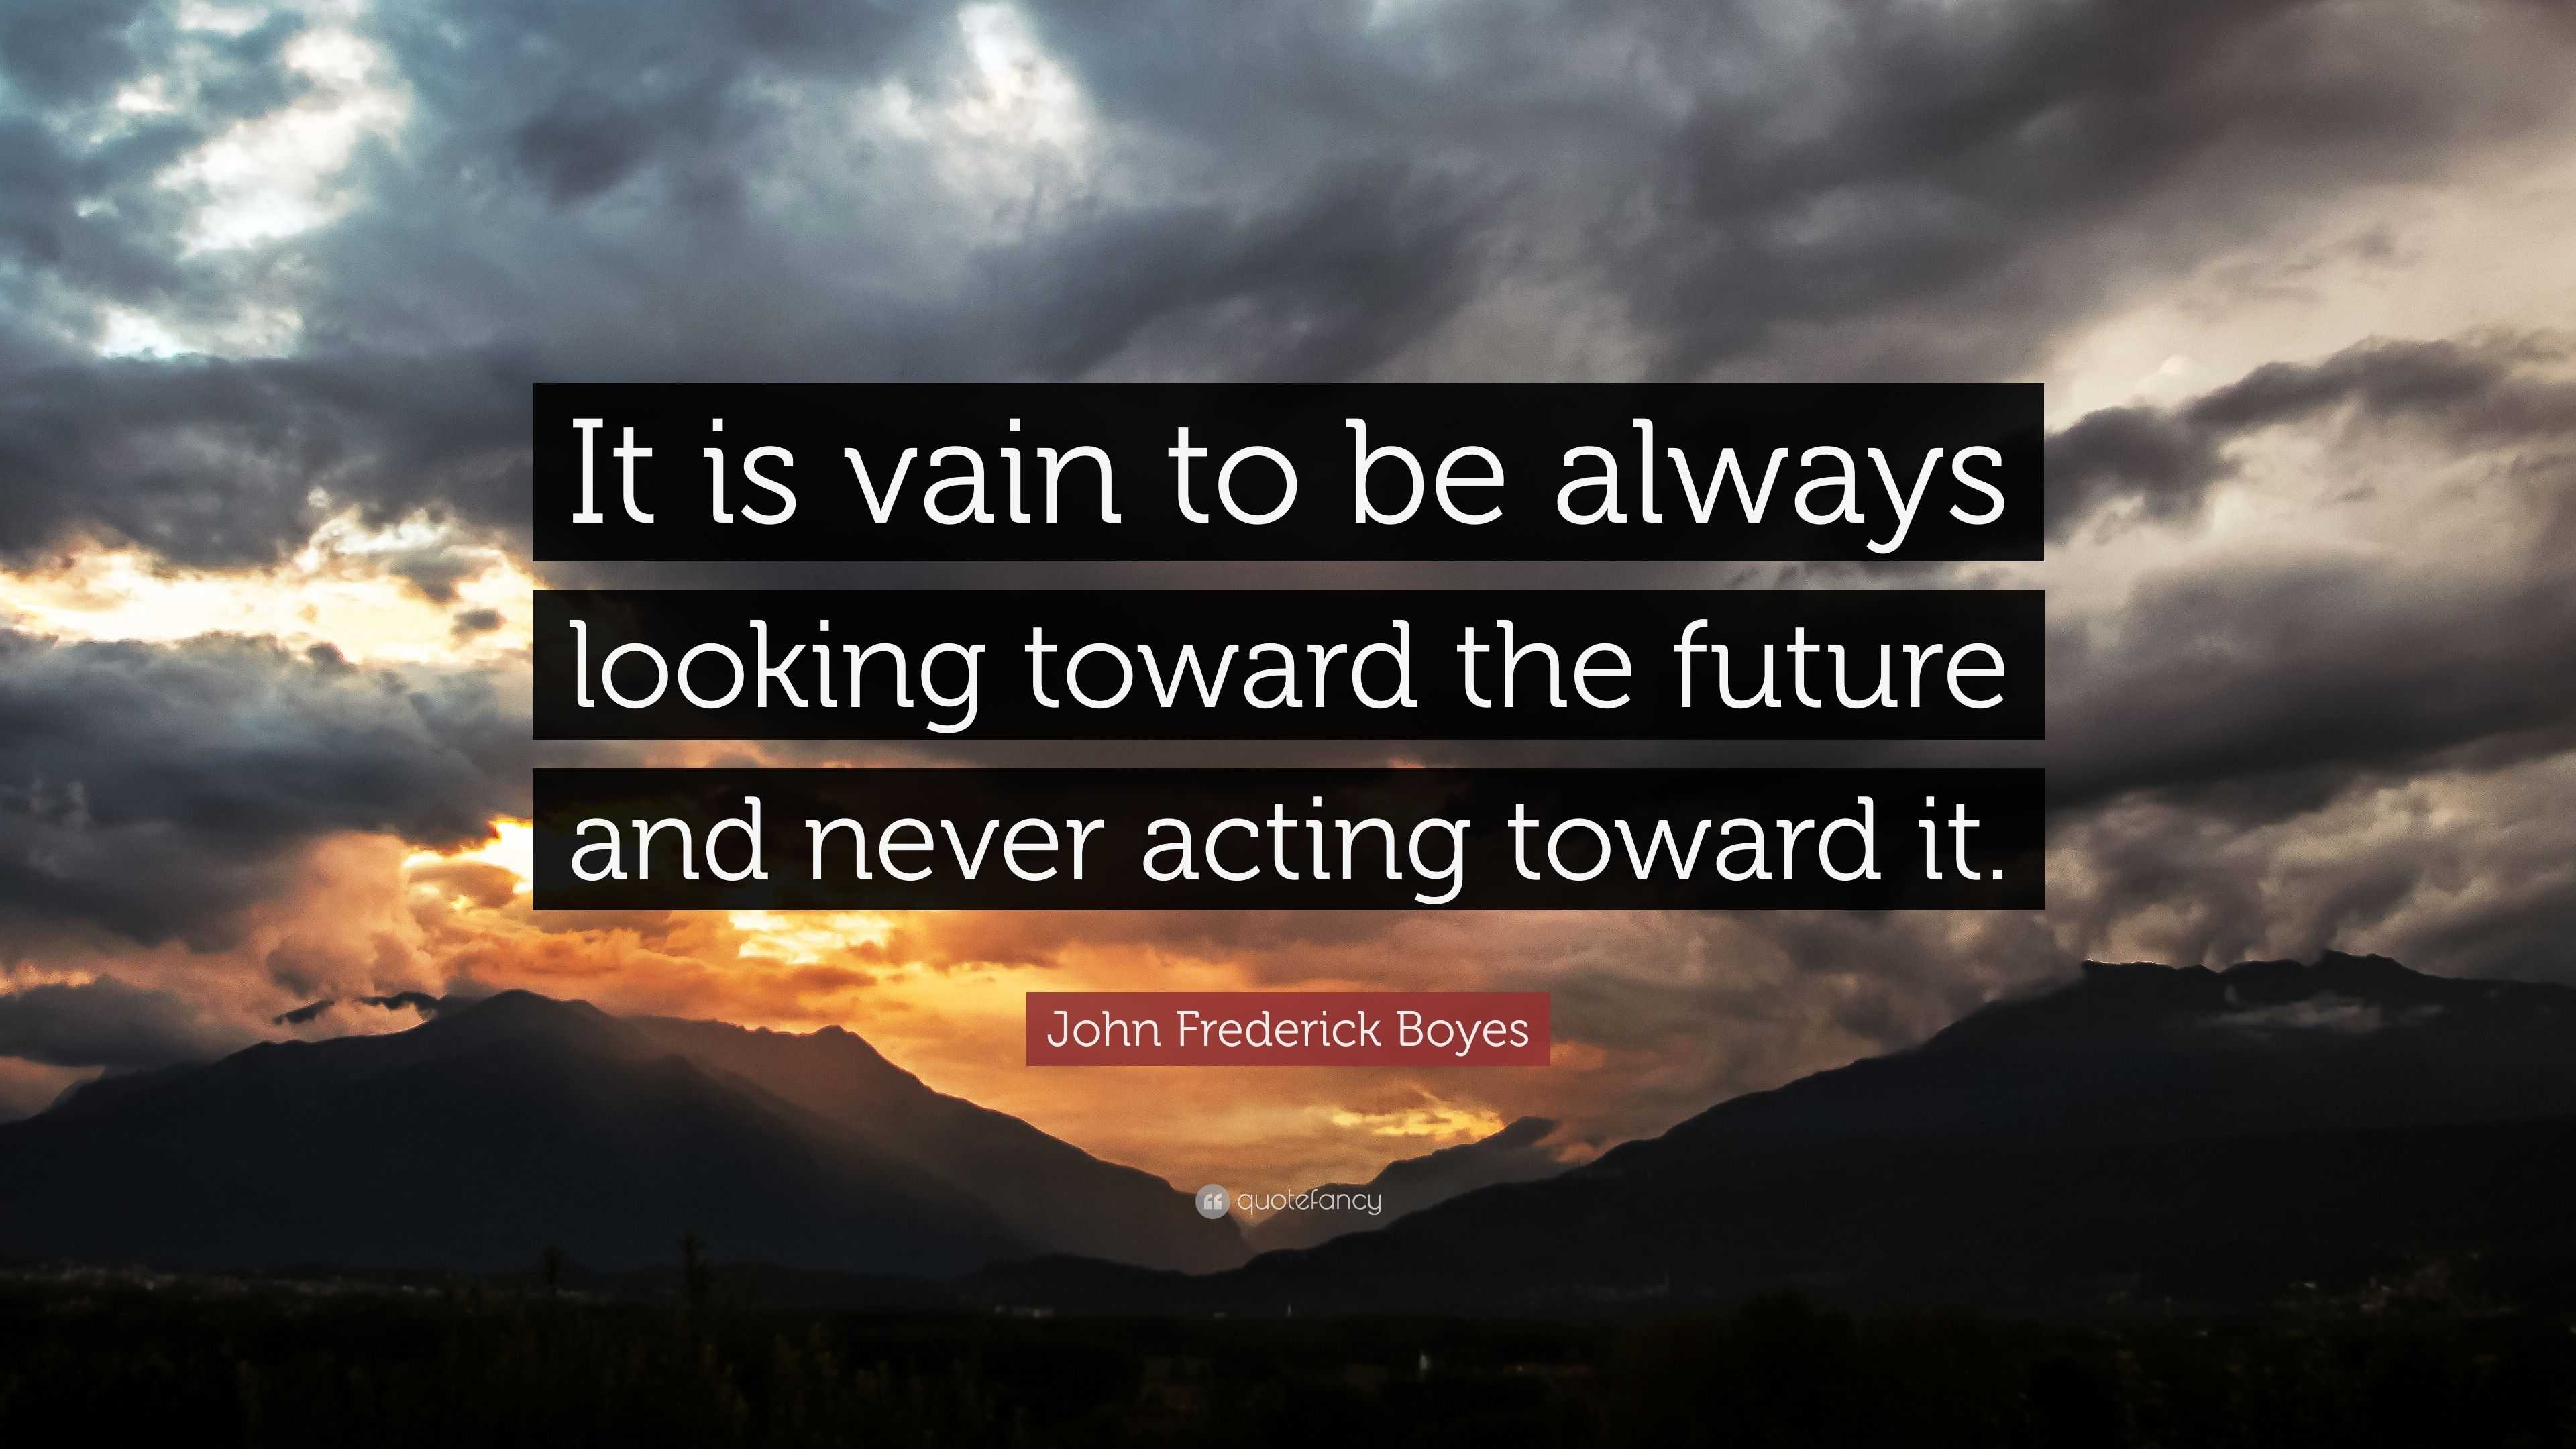 John Frederick Boyes Quote: “It is vain to be always looking toward the ...